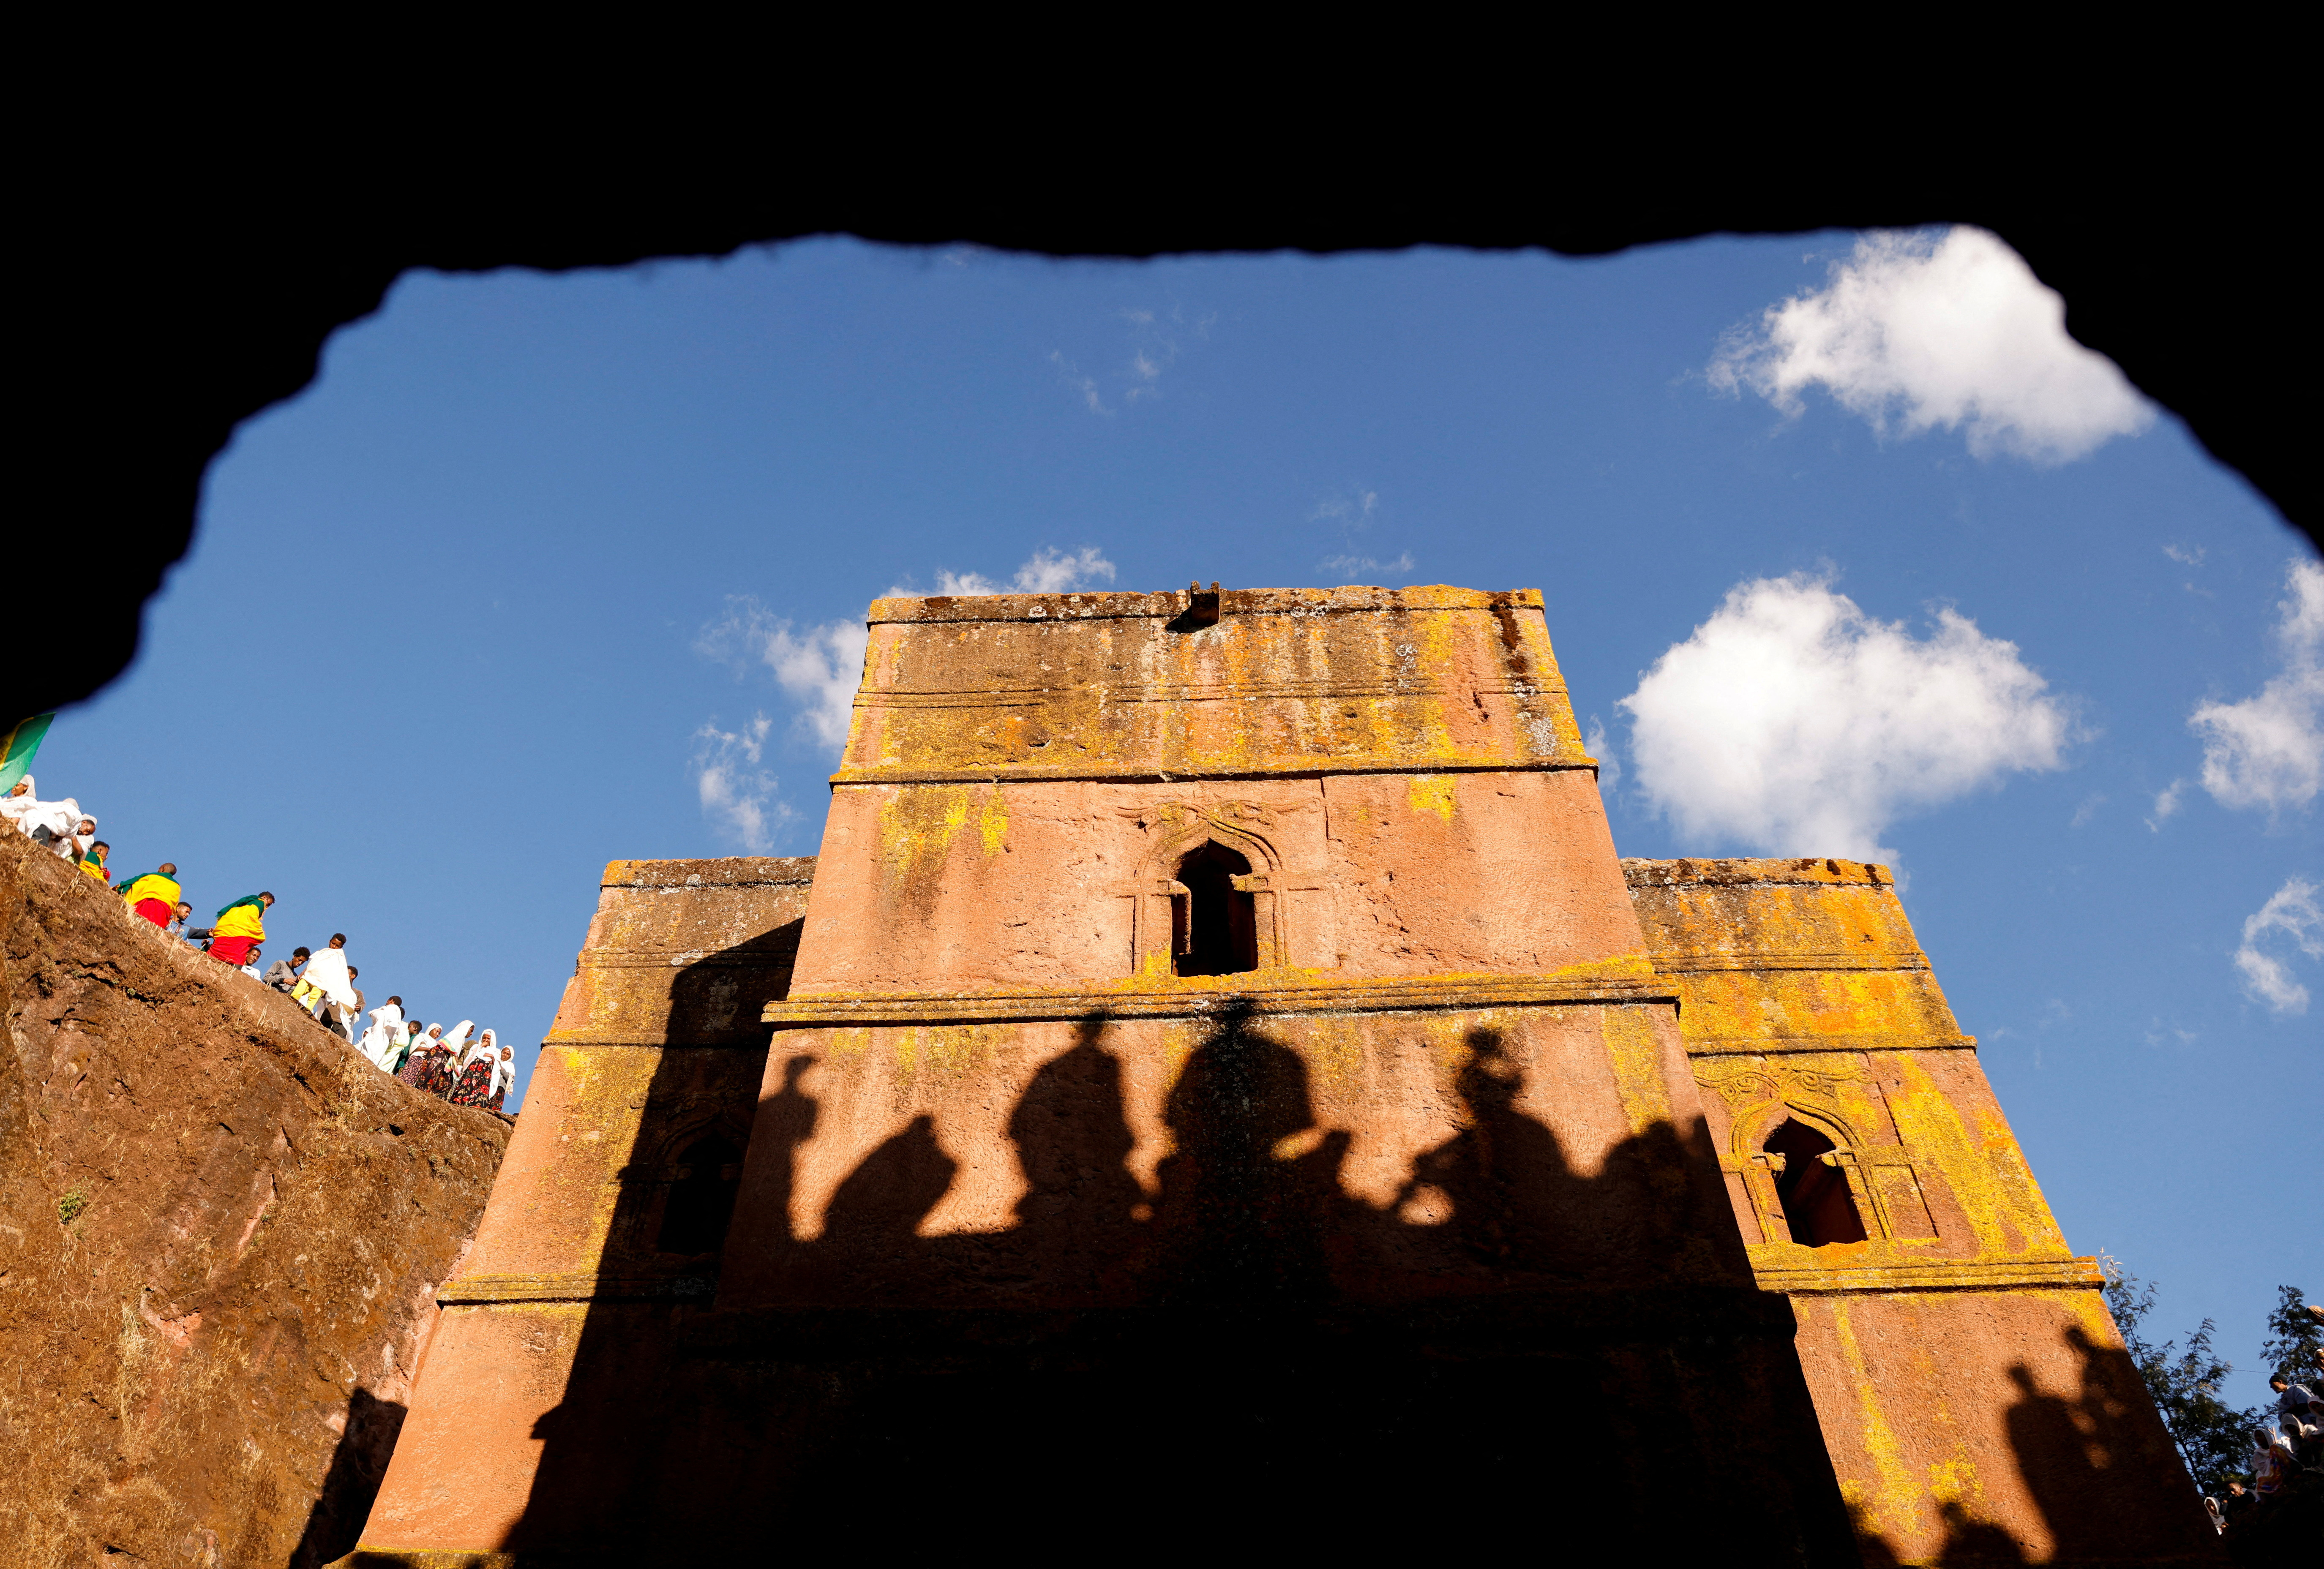 Ethiopian Orthodox pilgrims wait to attend the Ethiopian Christmas Eve celebration at the St.George Rock-Hewn church in Lalibela